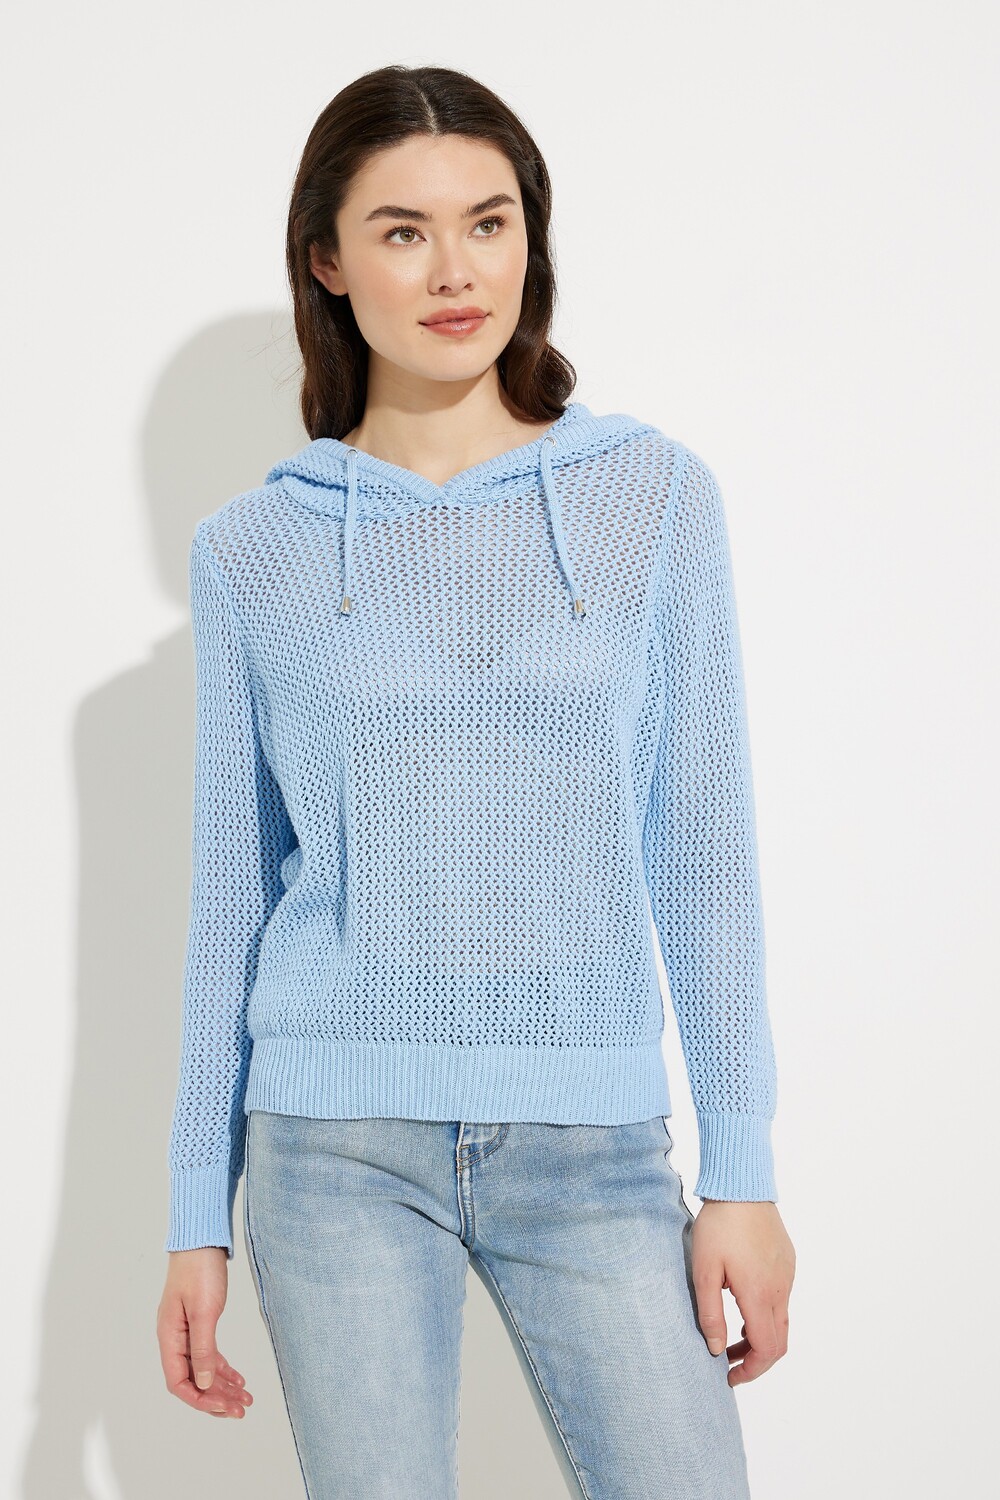 Knit Hooded Sweater Style A41028. Sky Blue